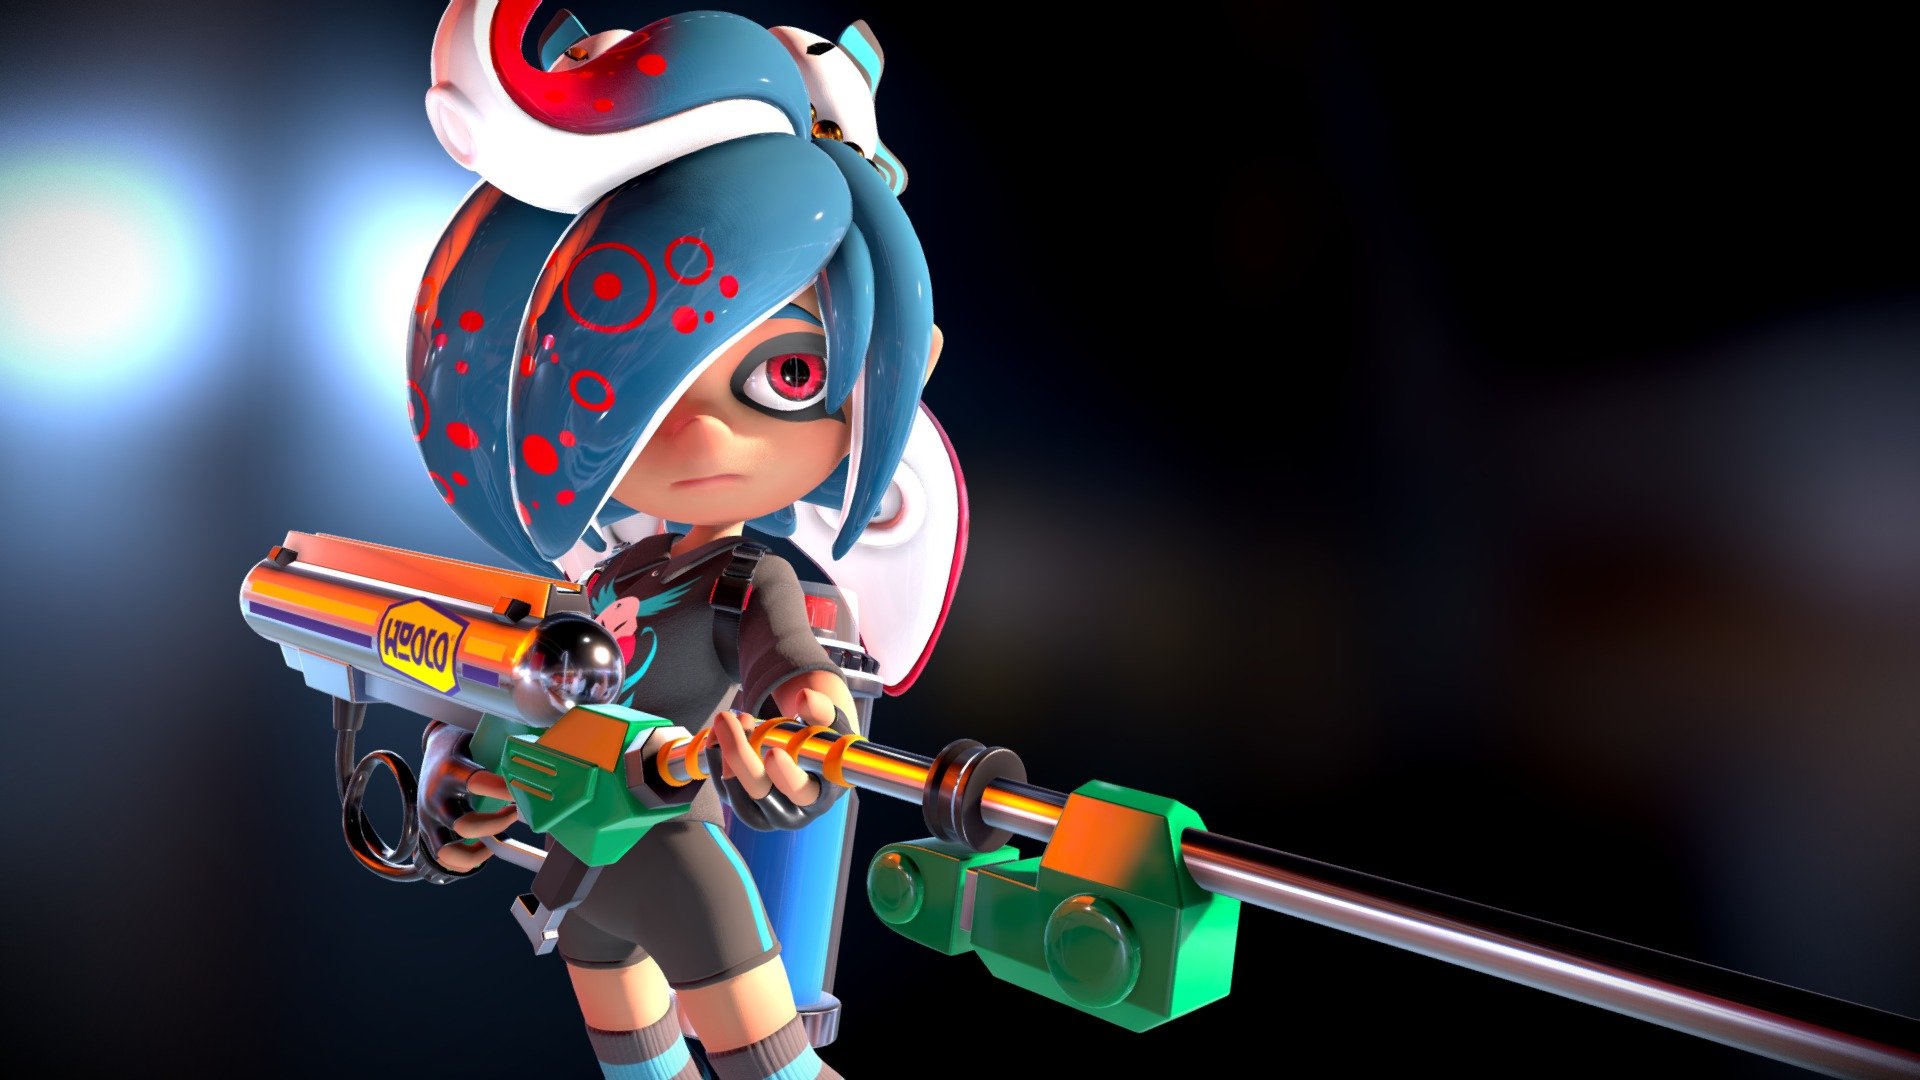 She's an inkling/octoling hybrid and she just won't let her E-liter 3K go - Selena Janet - 3D model by R-no71 3d model